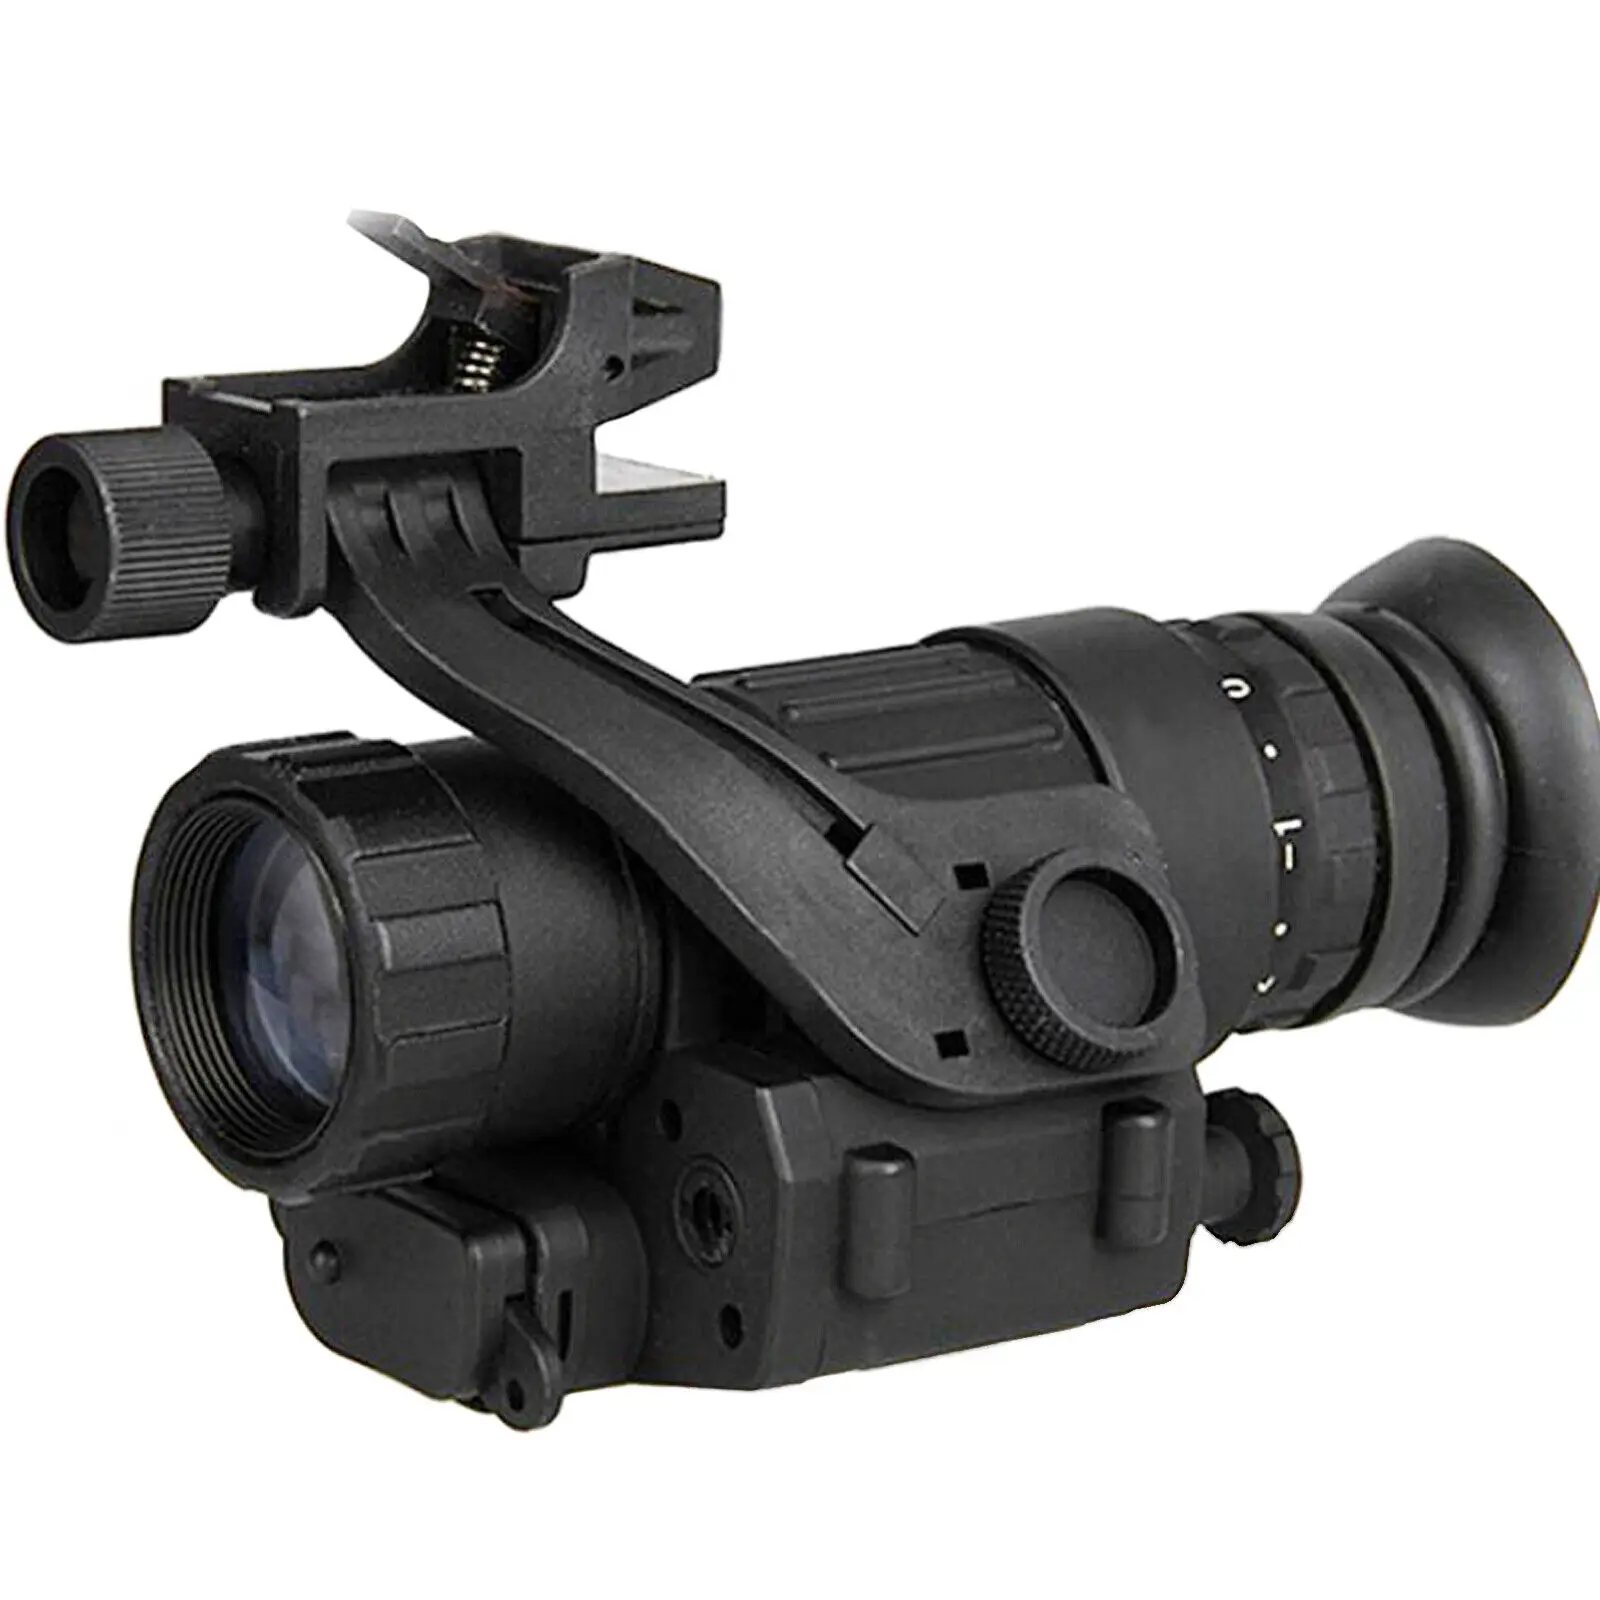 

END OF THE YEAR SALES Home delivery for Armasight MNVD Multi-Purpose Night Vision Monocular